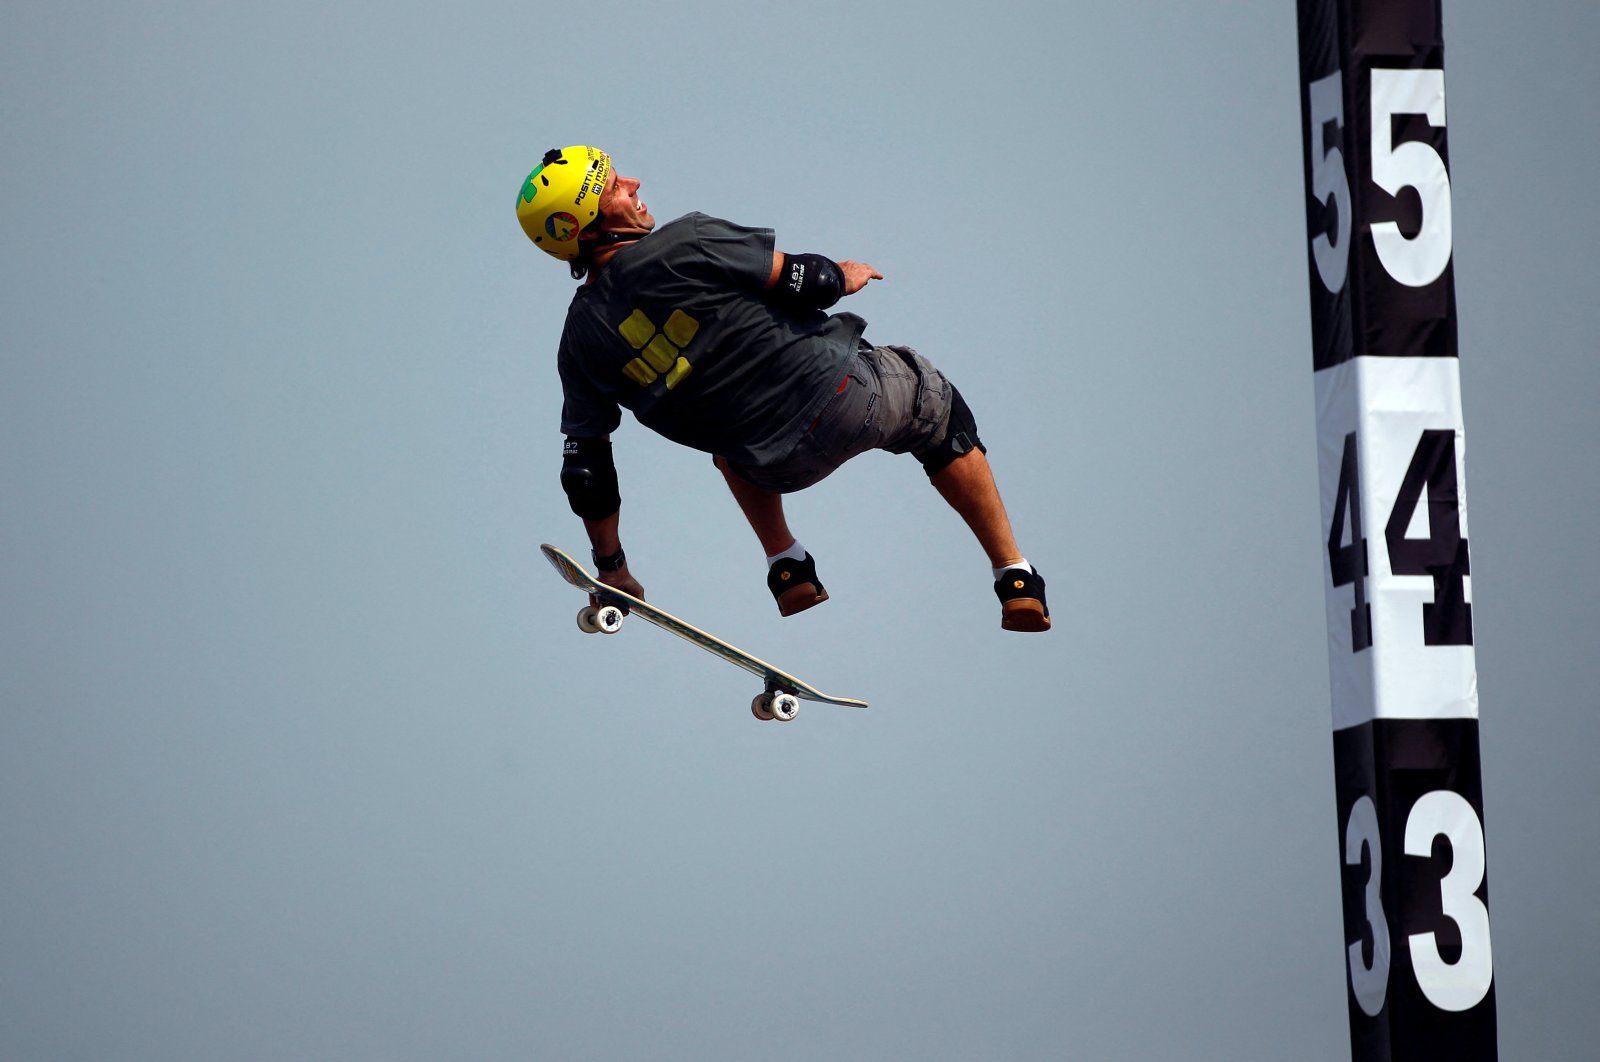 Skateboarder Andy Macdonald performs at the SKB Mini-Mega final during the World Extreme Games in Shanghai, China, May 2, 2014. (Reuters Photo)